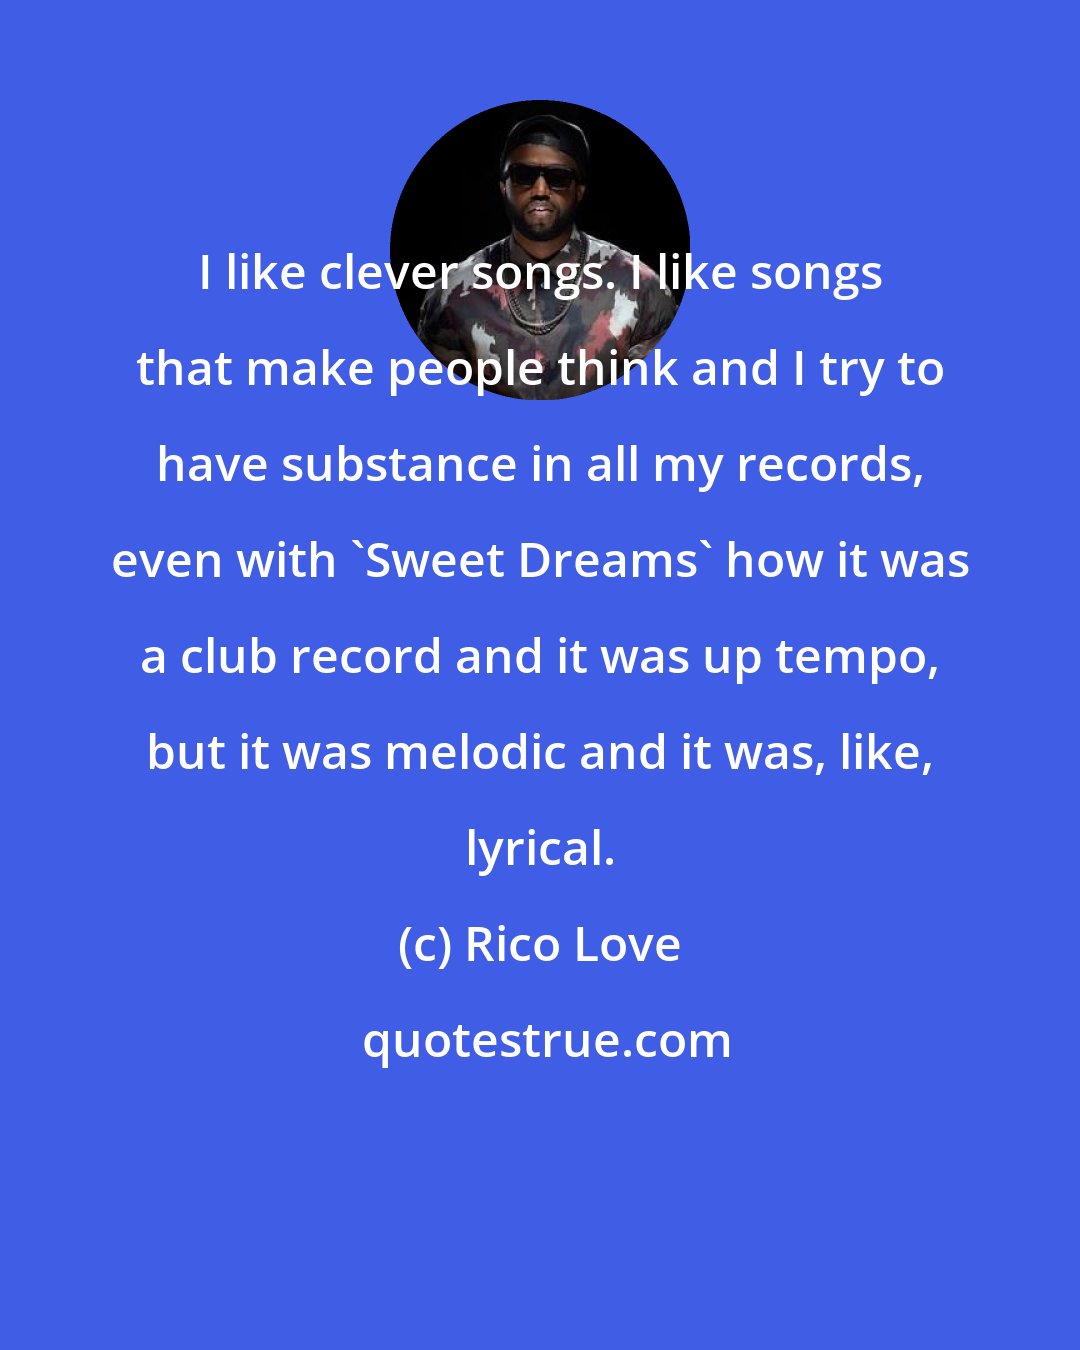 Rico Love: I like clever songs. I like songs that make people think and I try to have substance in all my records, even with 'Sweet Dreams' how it was a club record and it was up tempo, but it was melodic and it was, like, lyrical.